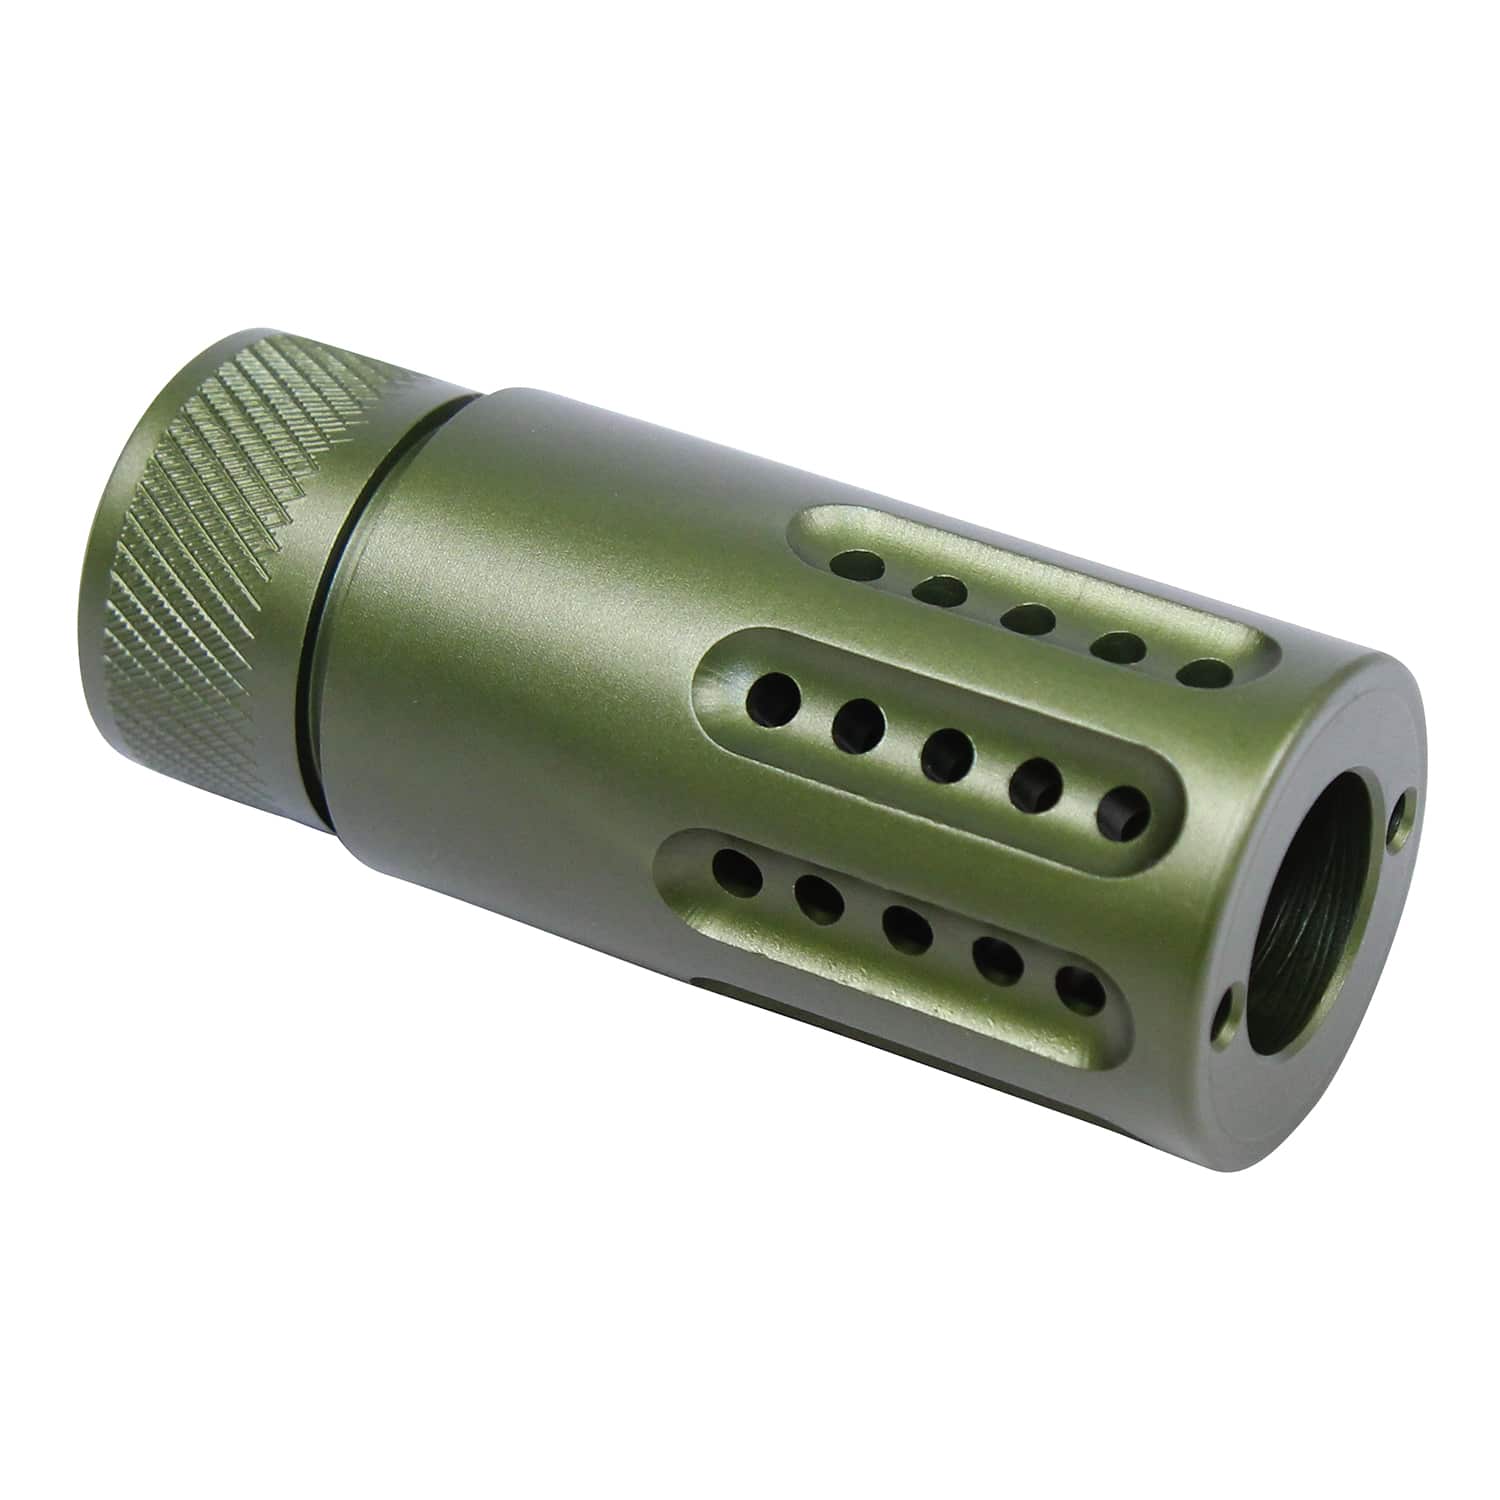 .308 Mini Slip Over Fake Suppressor with Ported Gatling Style Brake in Anodized Green